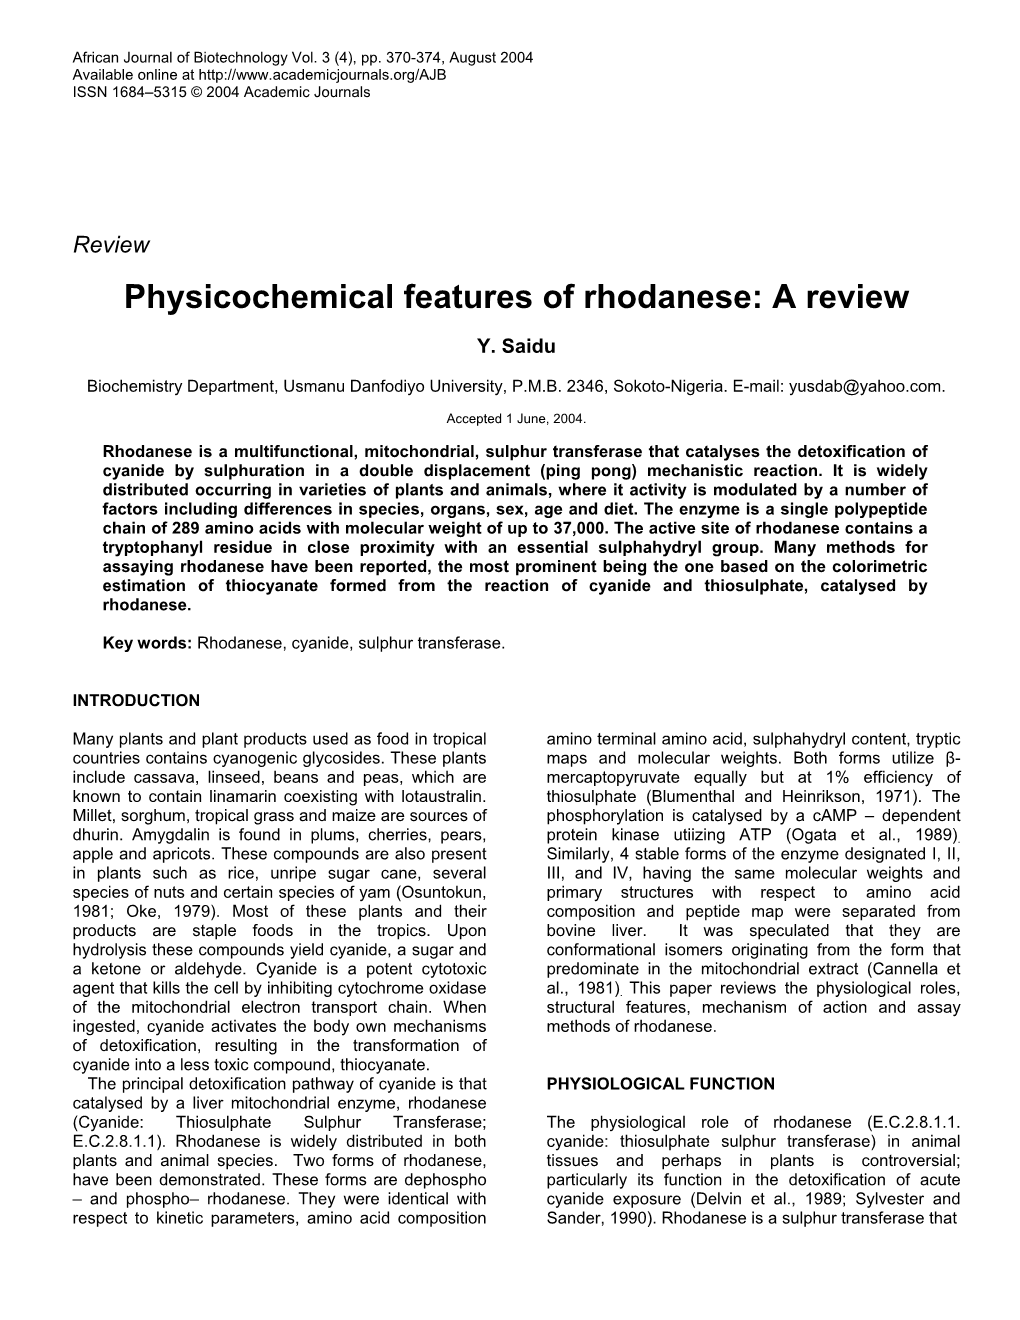 Physicochemical Features of Rhodanese: a Review